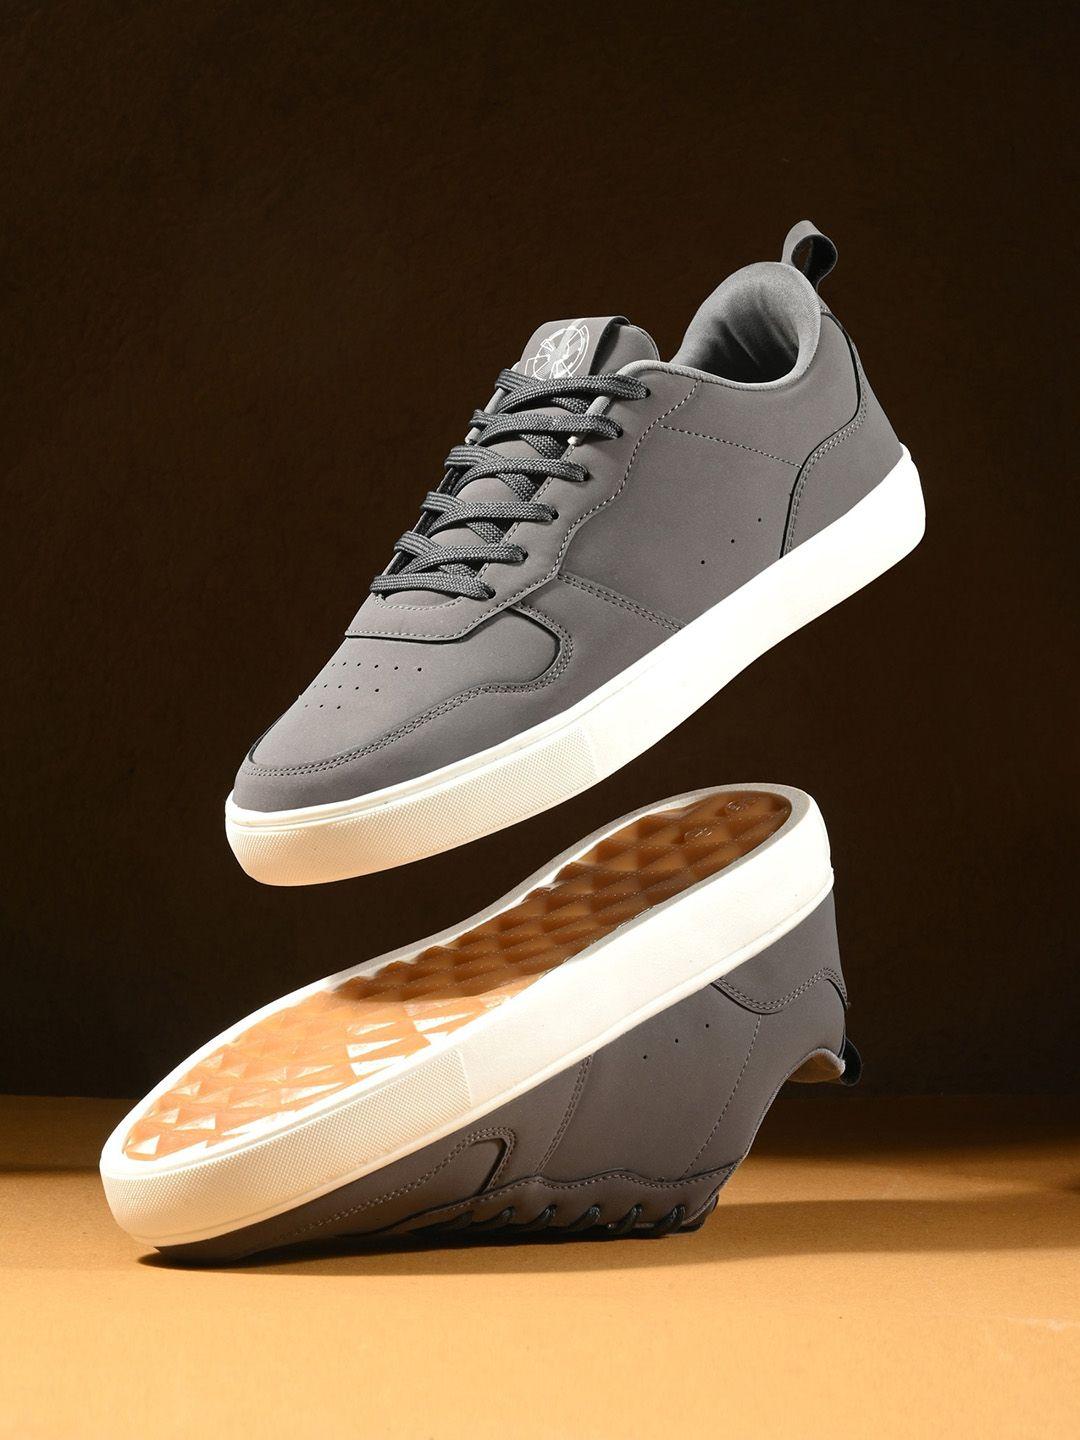 the roadster lifestyle co. men round toe sneakers